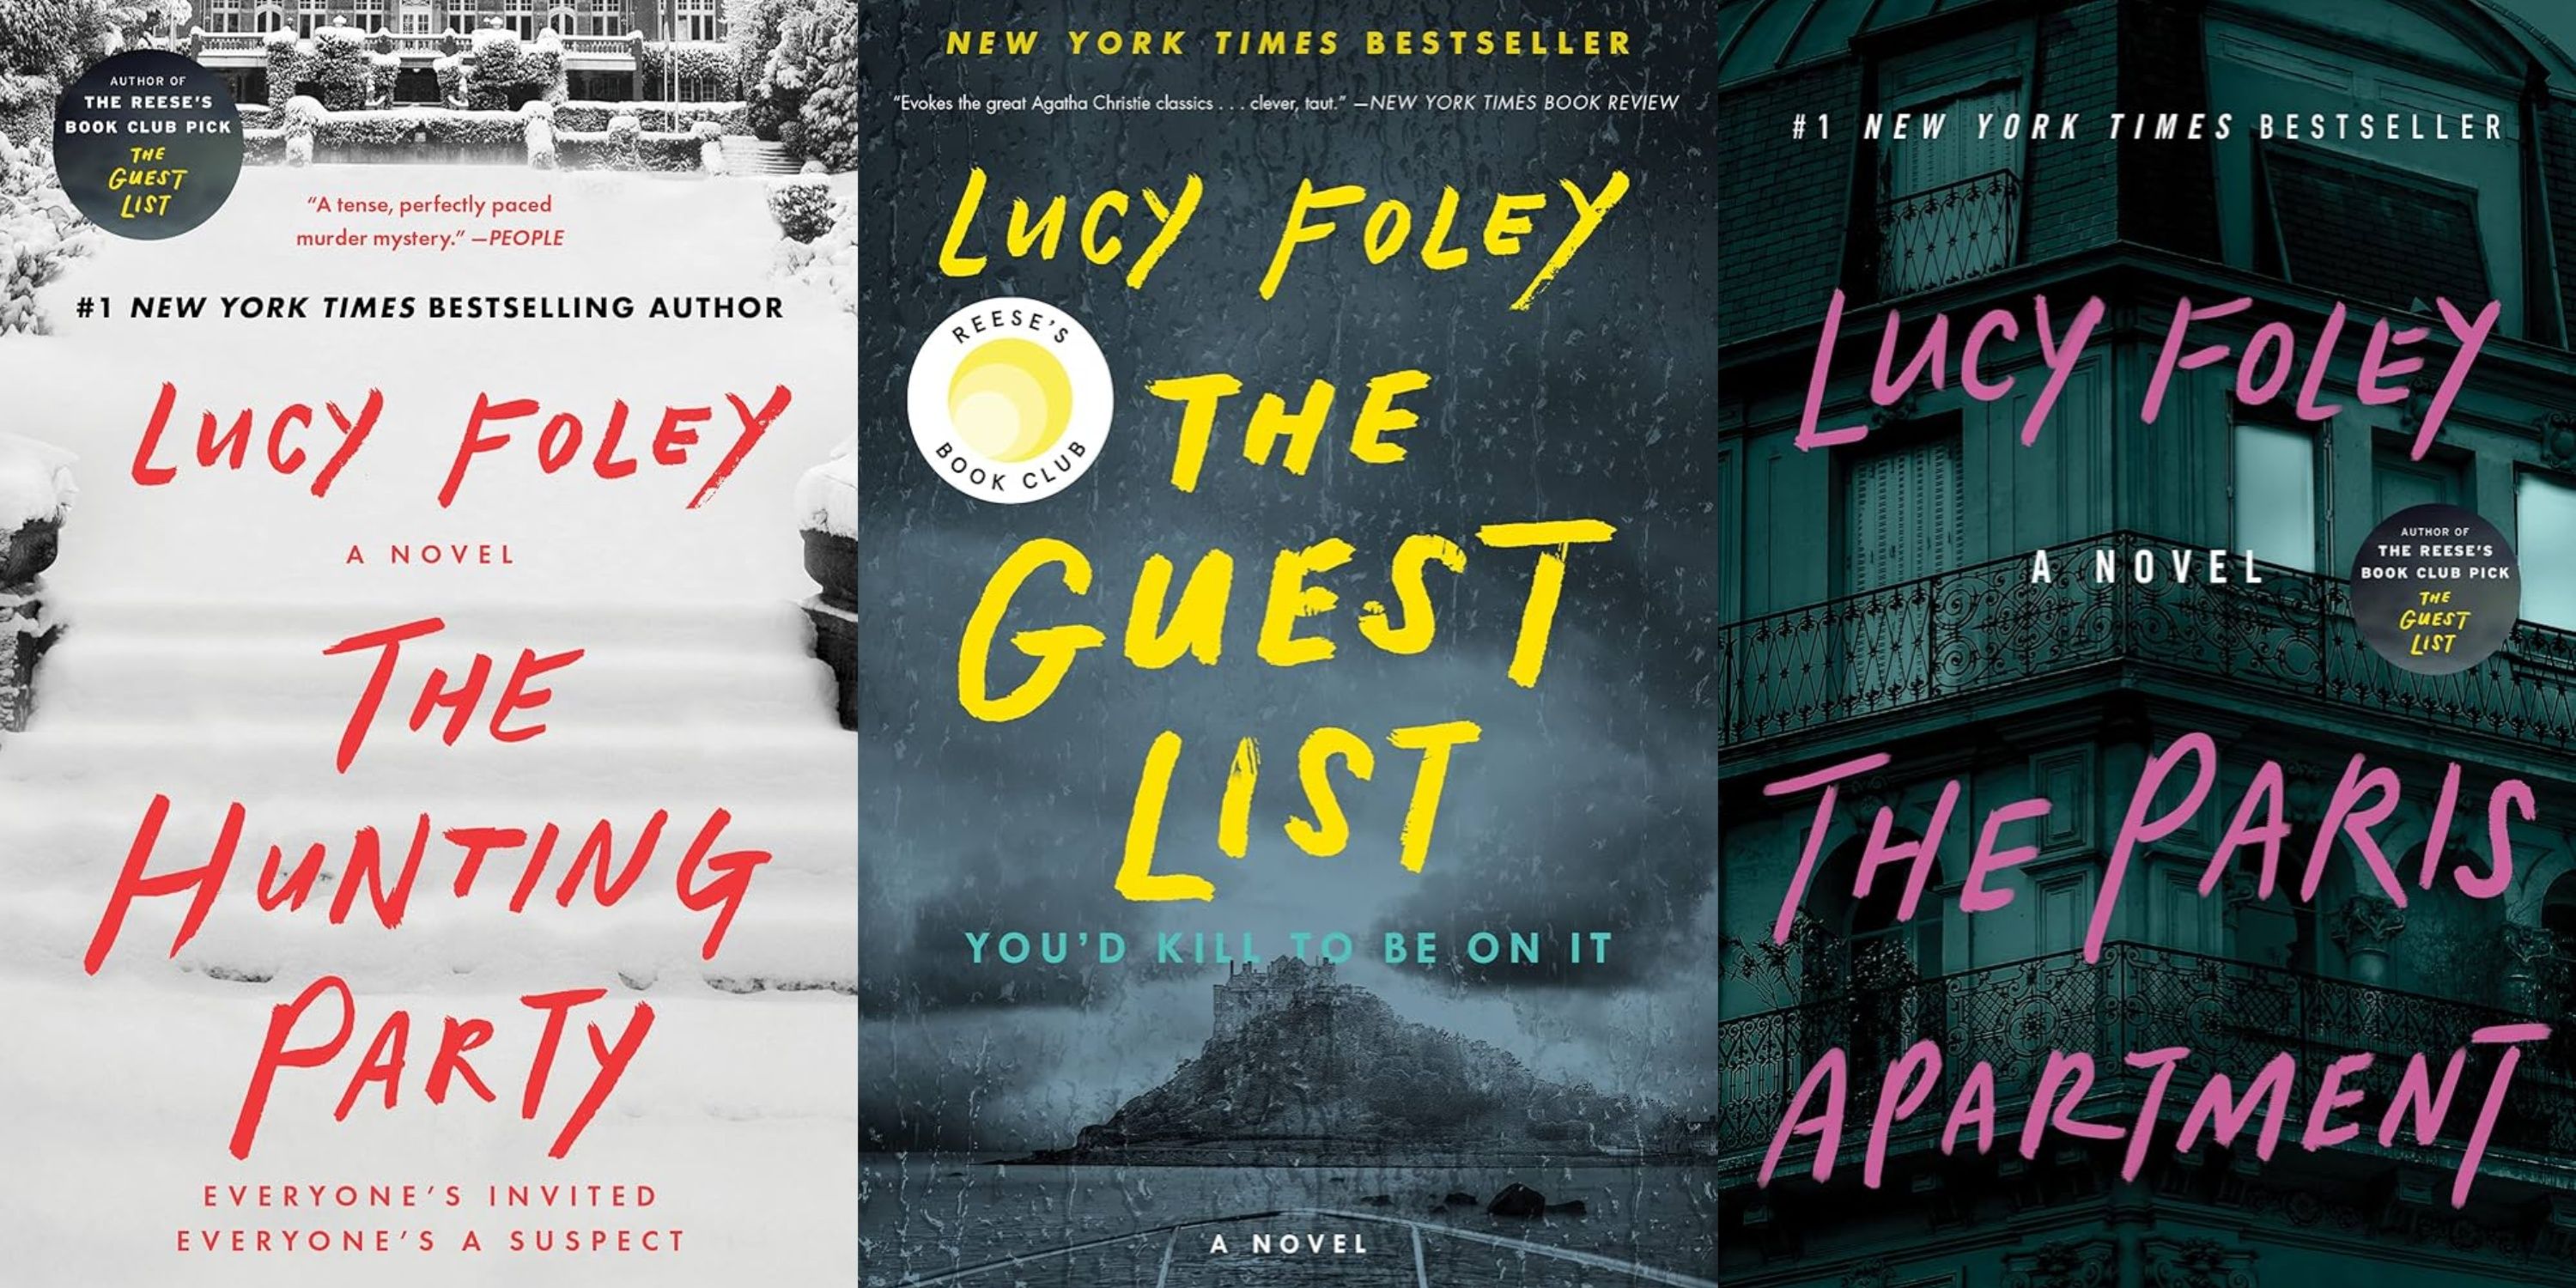 The American covers of The Hunting Party, The Guest List, and THe Paris Apartment by Lucy Foley